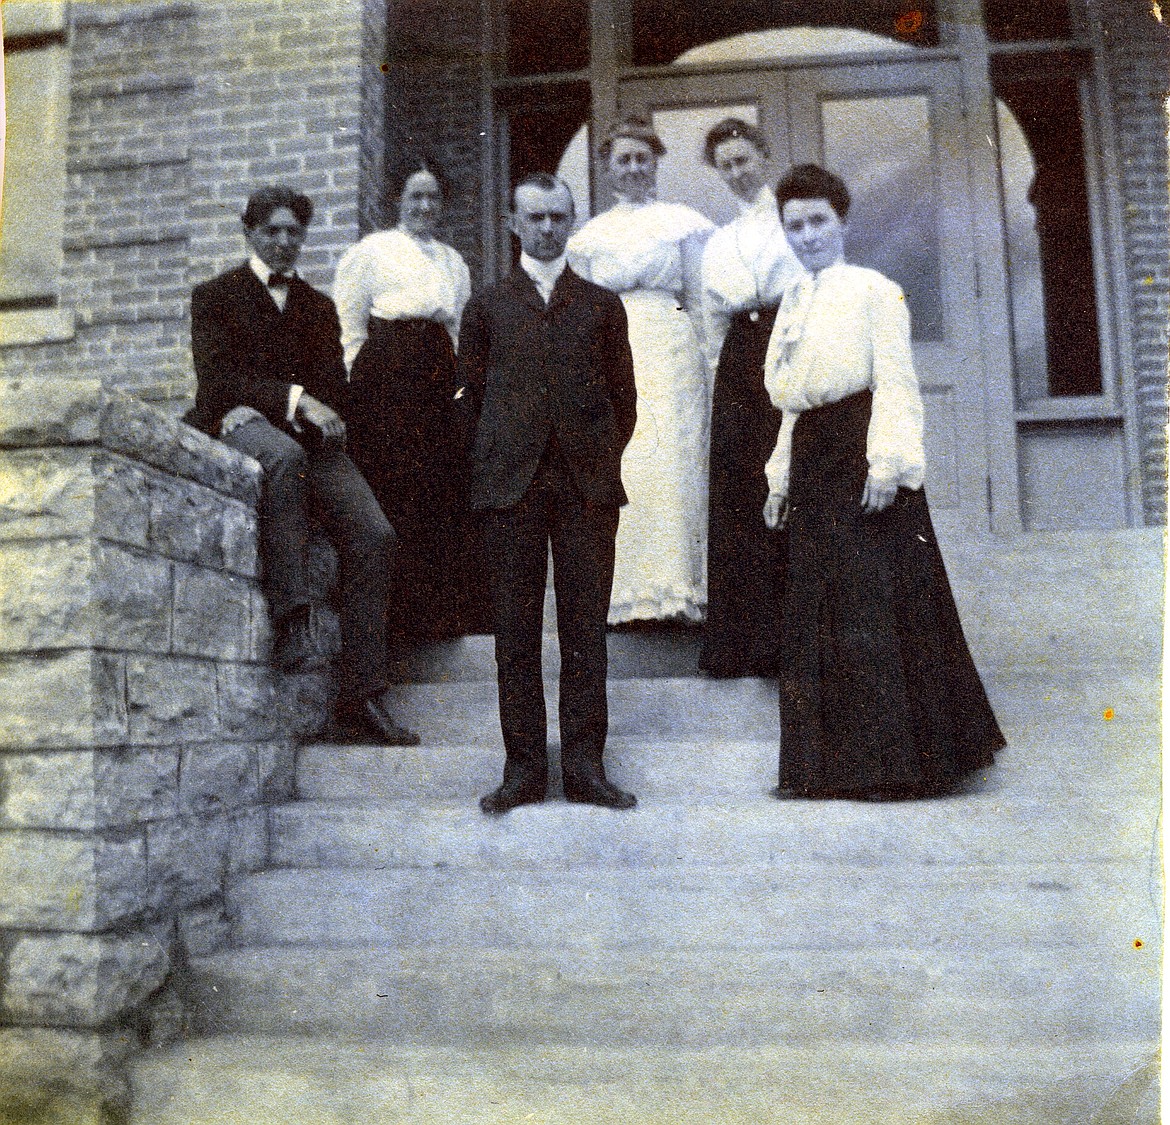 On the steps of Flathead High School, Bess Elliot Busey, Mabel Rich, May Trumper, Alice Butler White, Mr. Fault and Mr. Ketchum are photographed in 1908. (courtesy of the Northwest Montana History Museum)